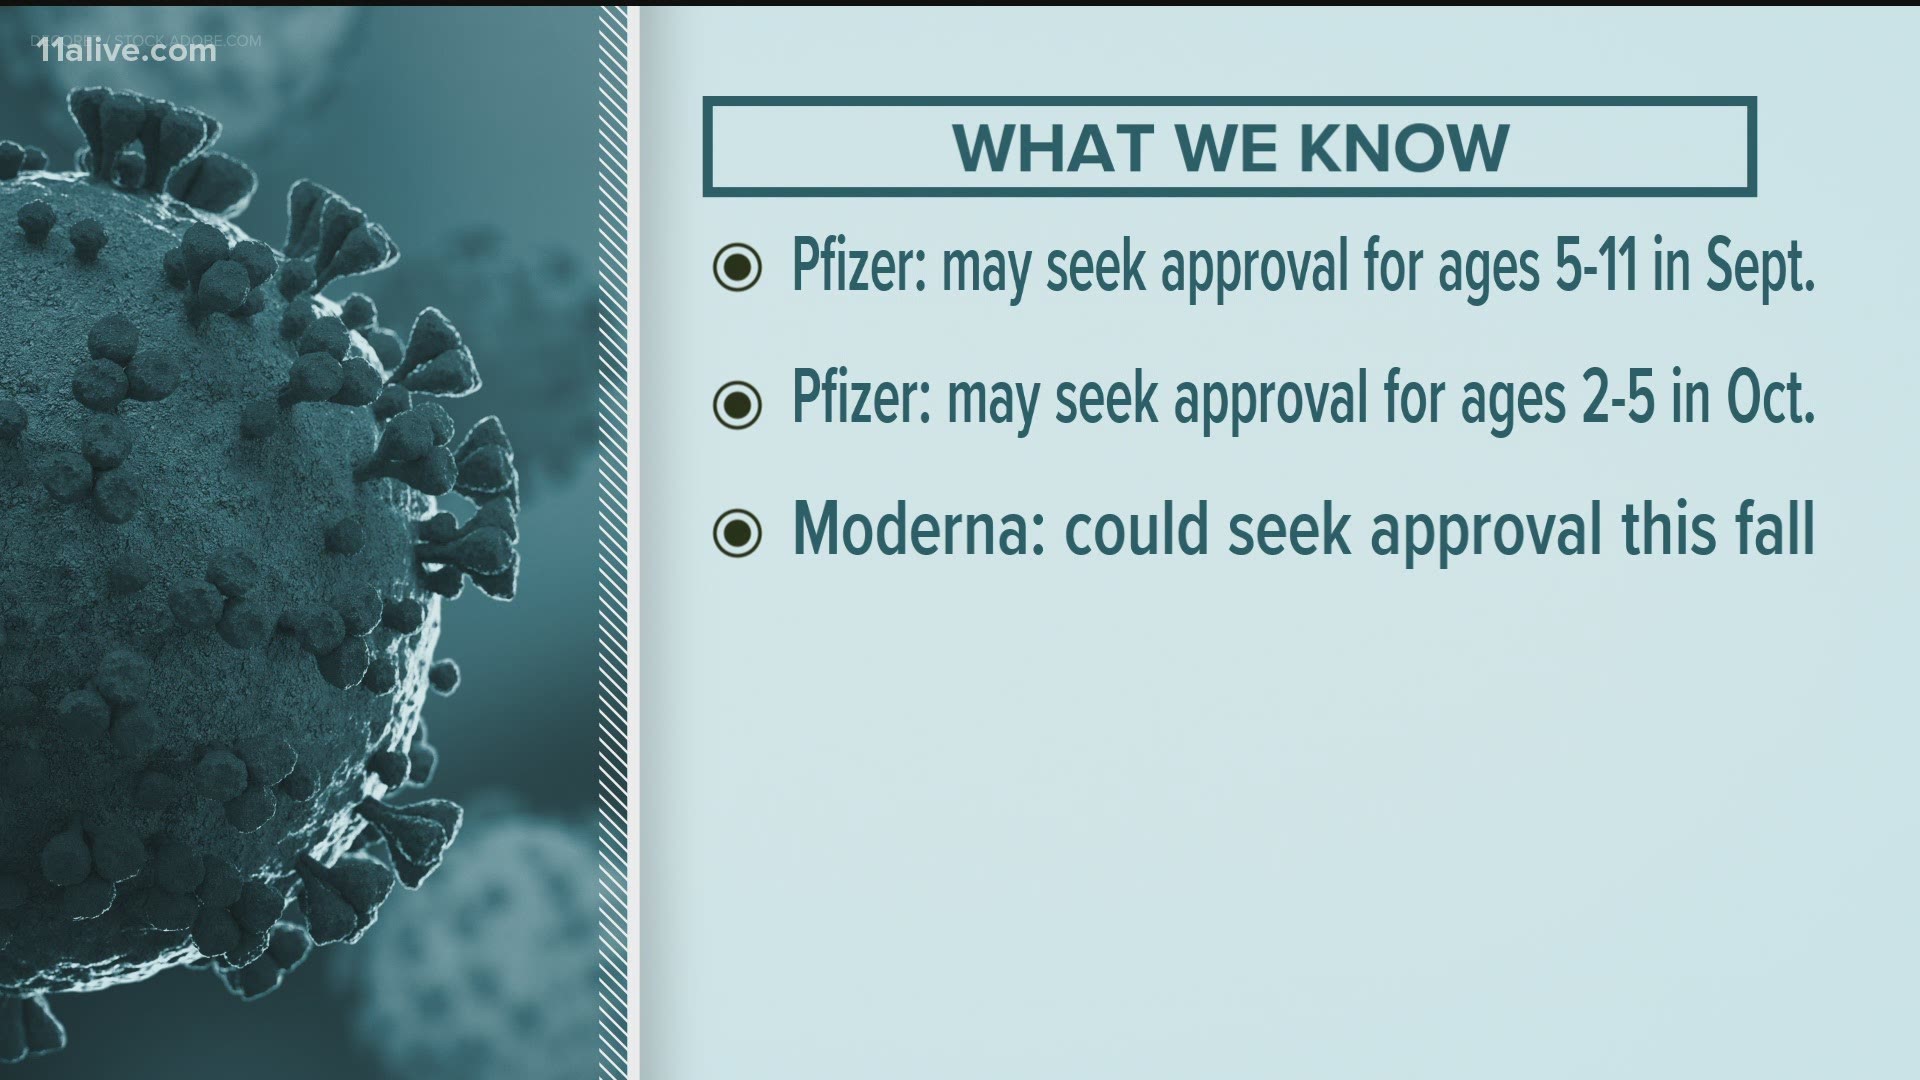 Pfizer is still doing clinical trials but could get data back for kids 5 to 11 in September.